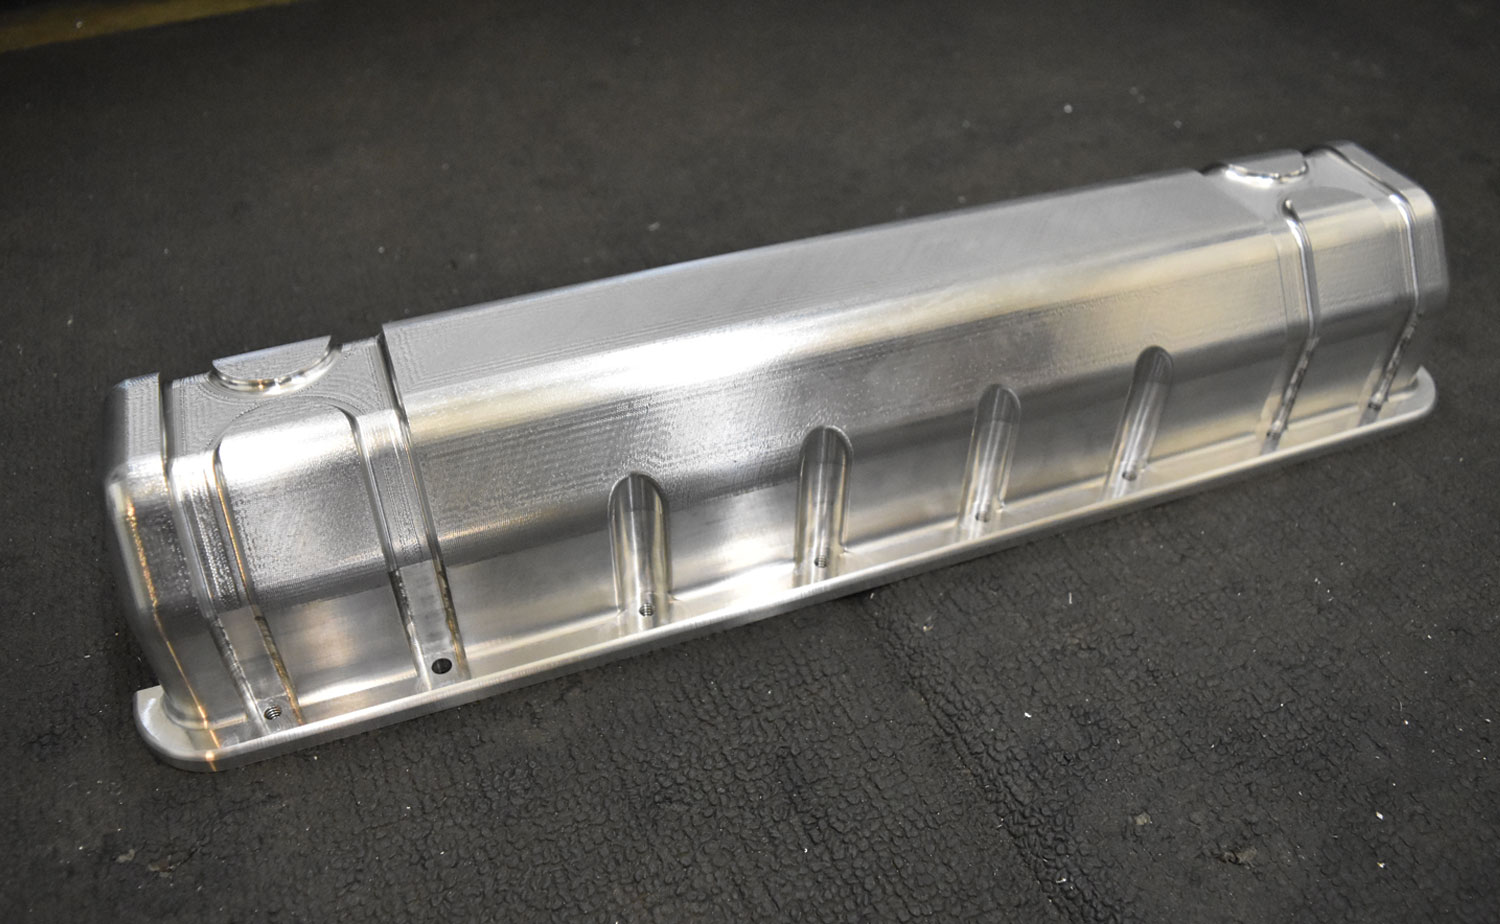 a faux valve cover, designed to replicate the look of a vintage engine, sits on a surface